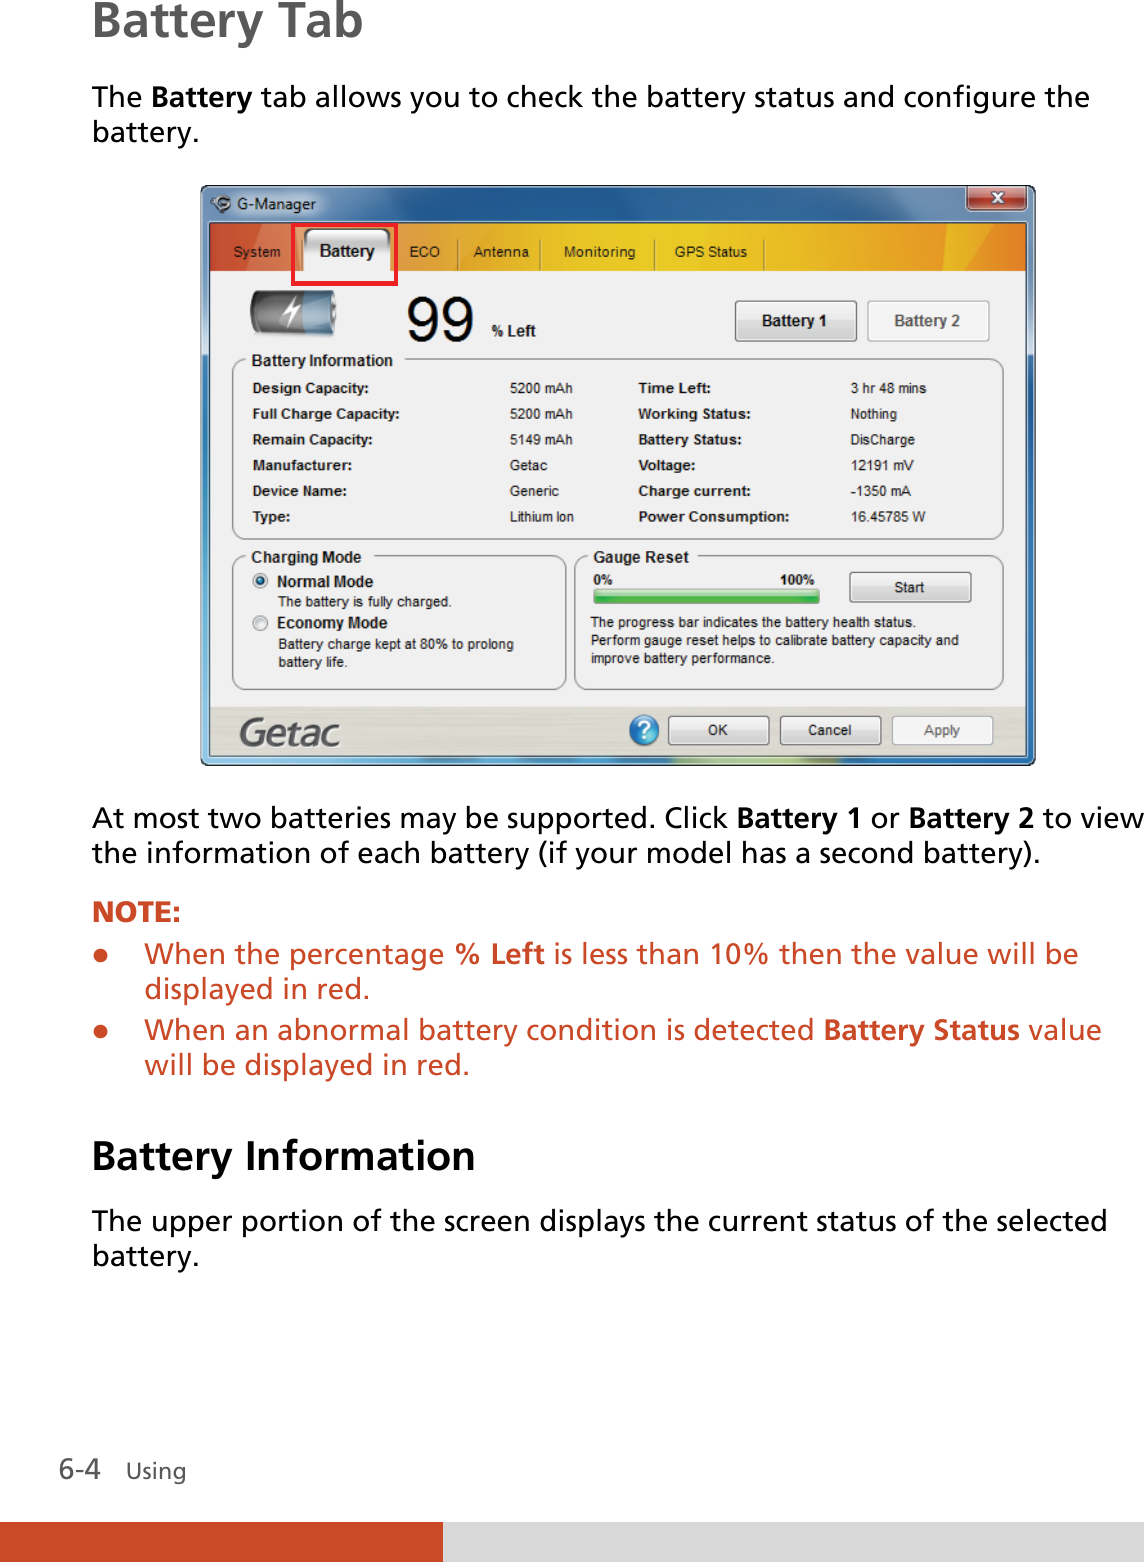  6-4   Using  Battery Tab The Battery tab allows you to check the battery status and configure the battery.  At most two batteries may be supported. Click Battery 1 or Battery 2 to view the information of each battery (if your model has a second battery). NOTE: z When the percentage % Left is less than 10% then the value will be displayed in red. z When an abnormal battery condition is detected Battery Status value will be displayed in red.  Battery Information The upper portion of the screen displays the current status of the selected battery.  